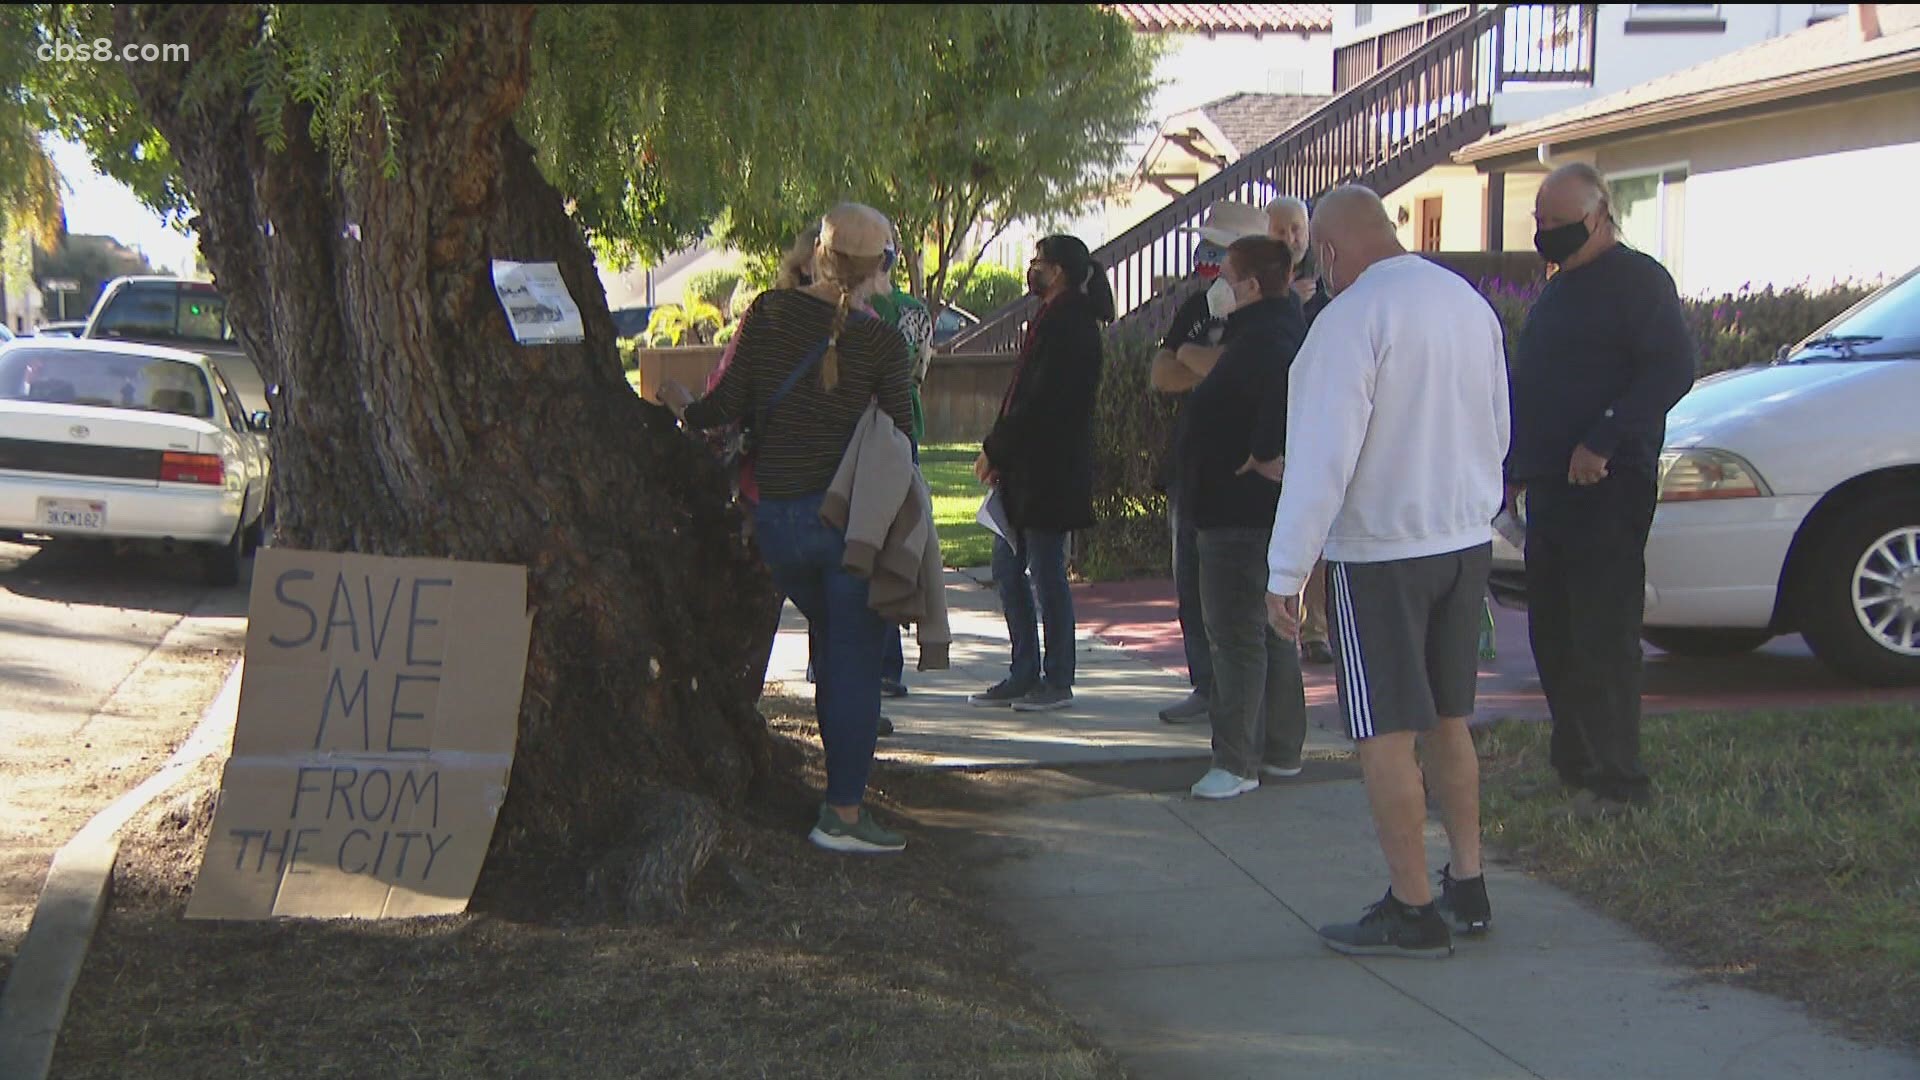 The City of San Diego says three trees have “Defects and Decay" and need to be removed. Residents say they plan to protest until the city takes a closer look.